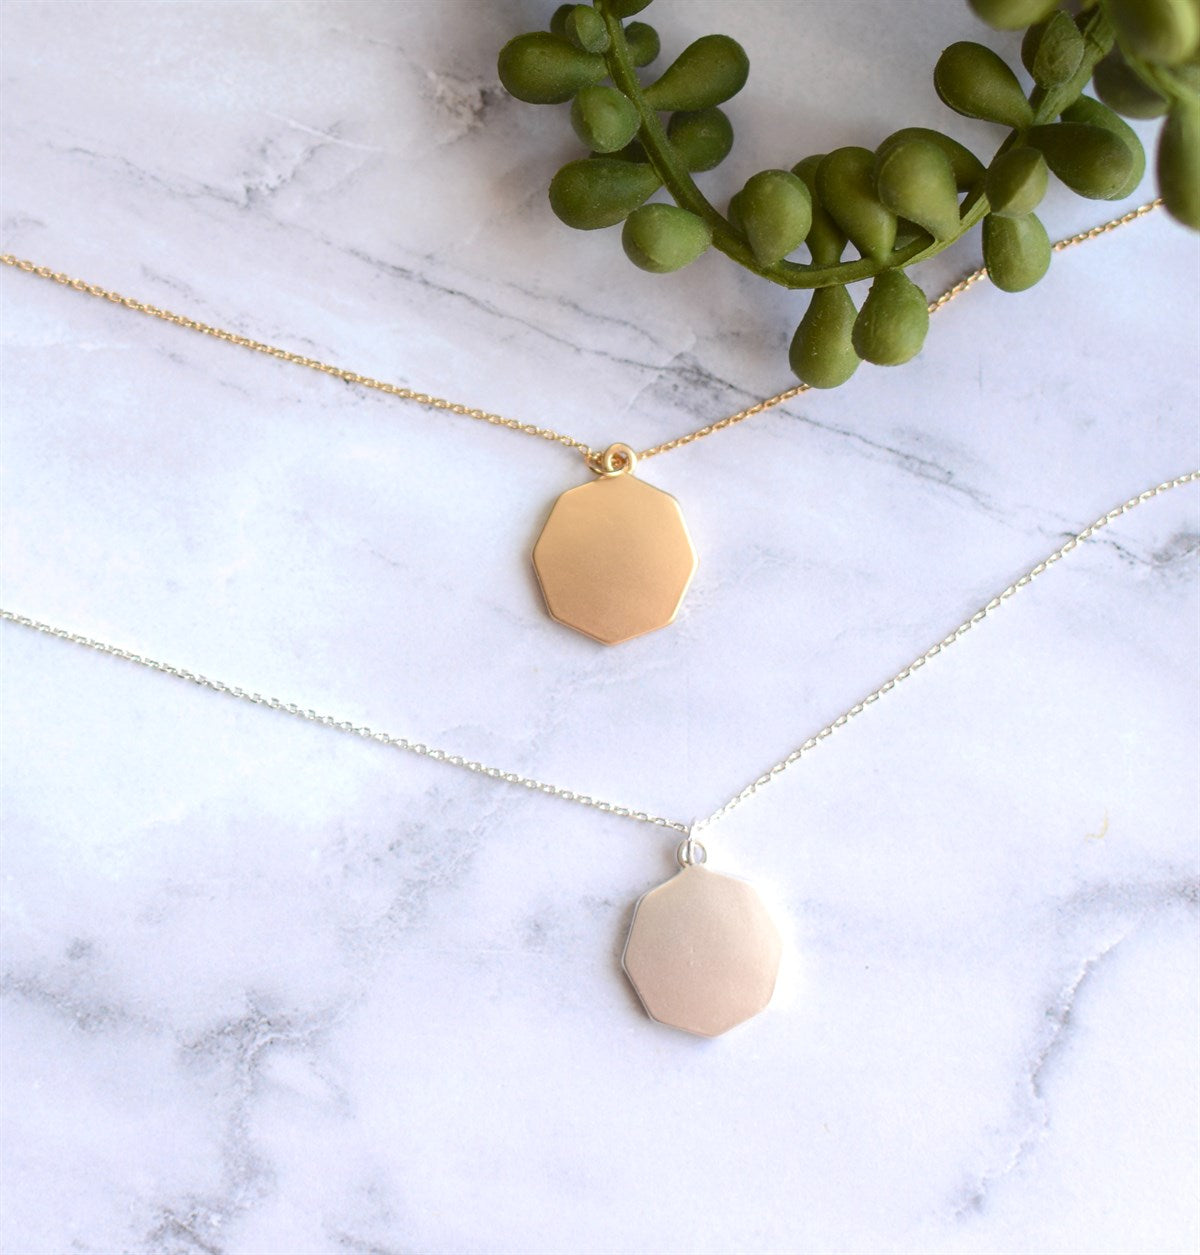 Geometric Simple Charm Necklace - 3 Styles - All Sales Final